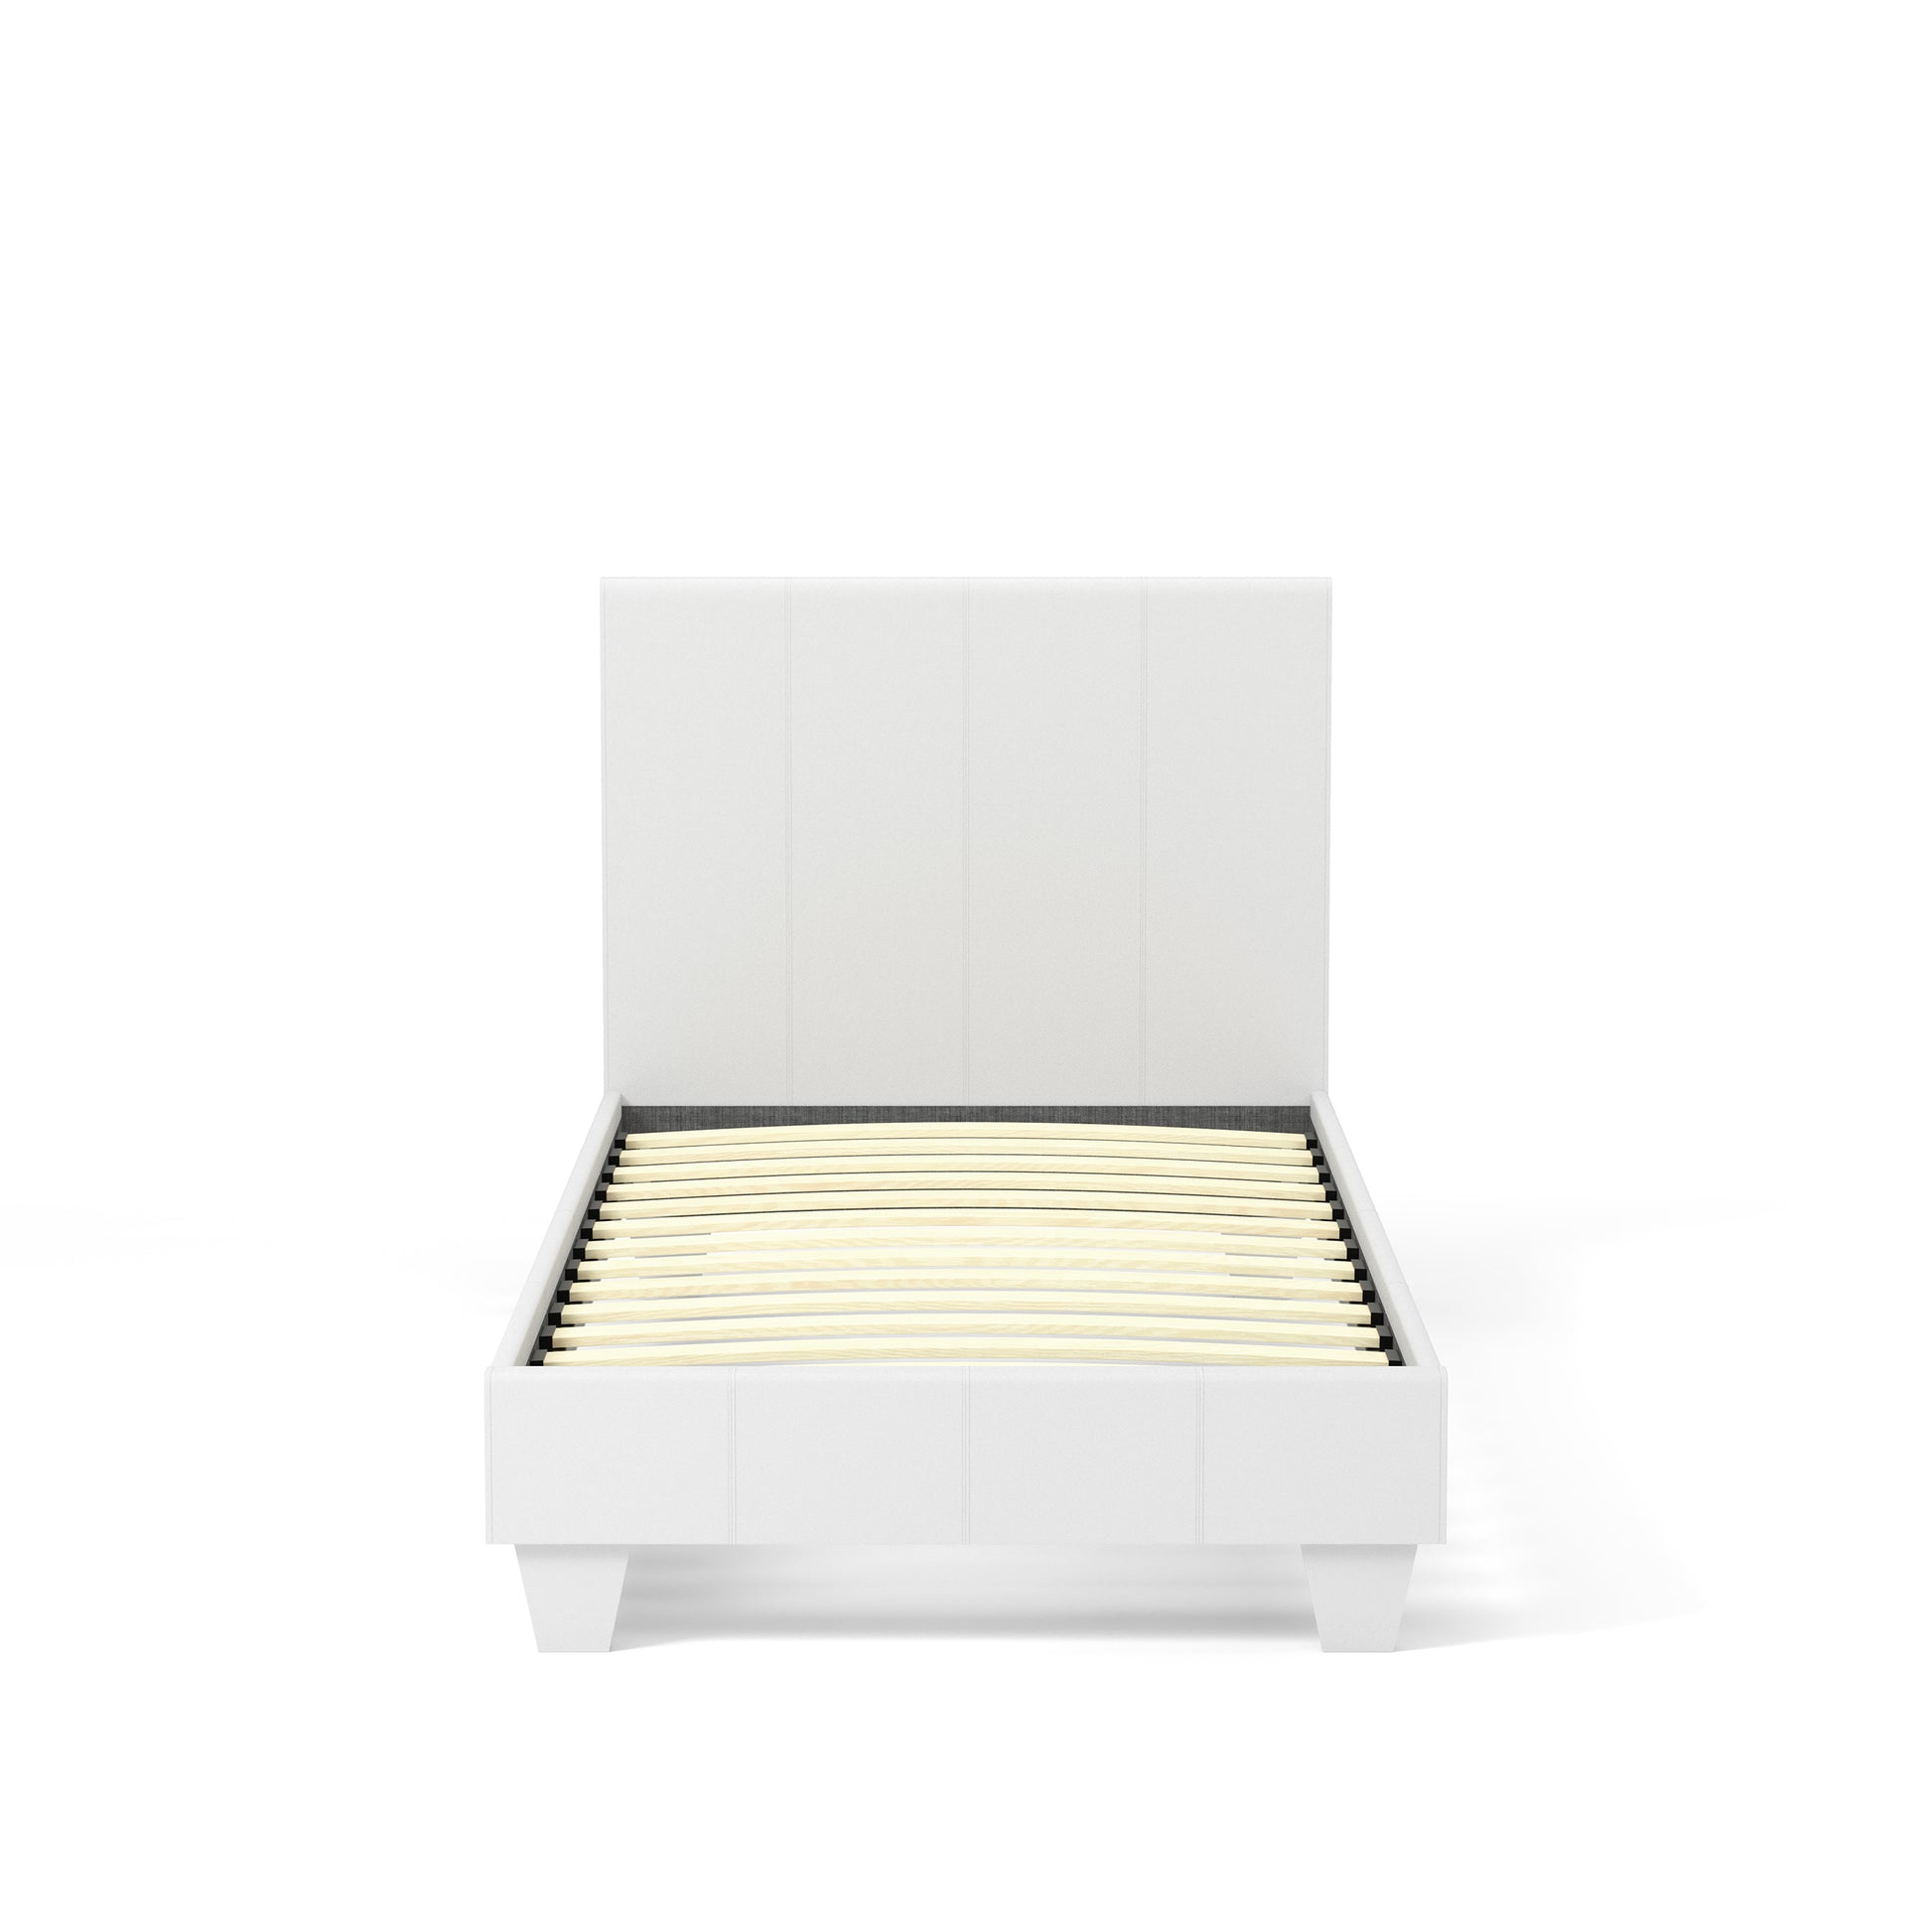 Front-facing contemporary white faux leather twin platform bed on a white background